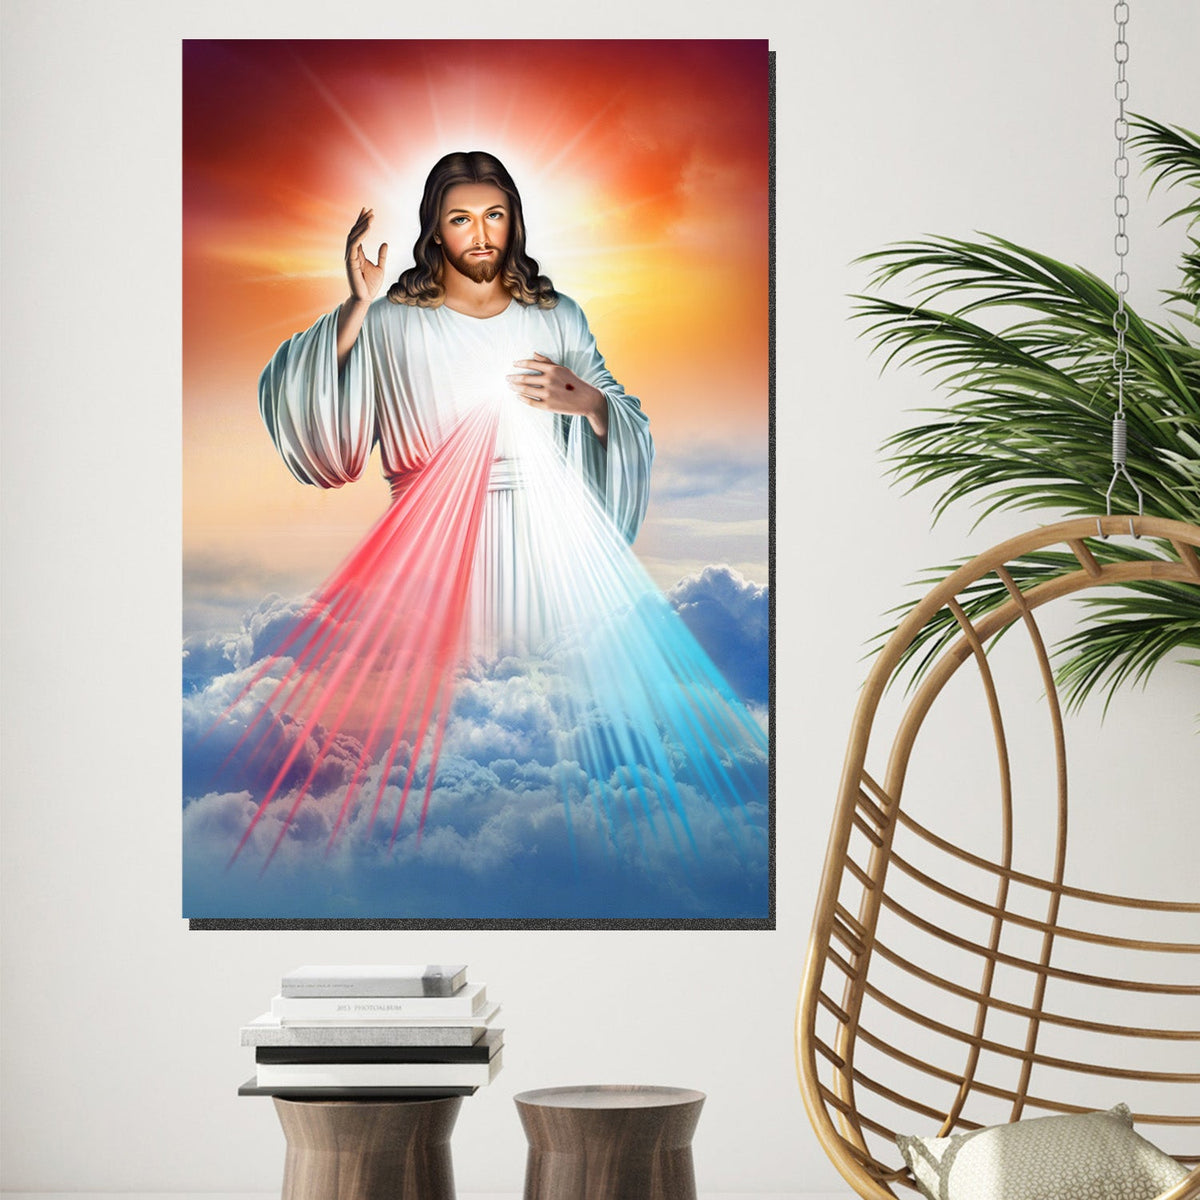 https://cdn.shopify.com/s/files/1/0387/9986/8044/products/DivineMercyofJesusCanvasArtprintStretched-3.jpg